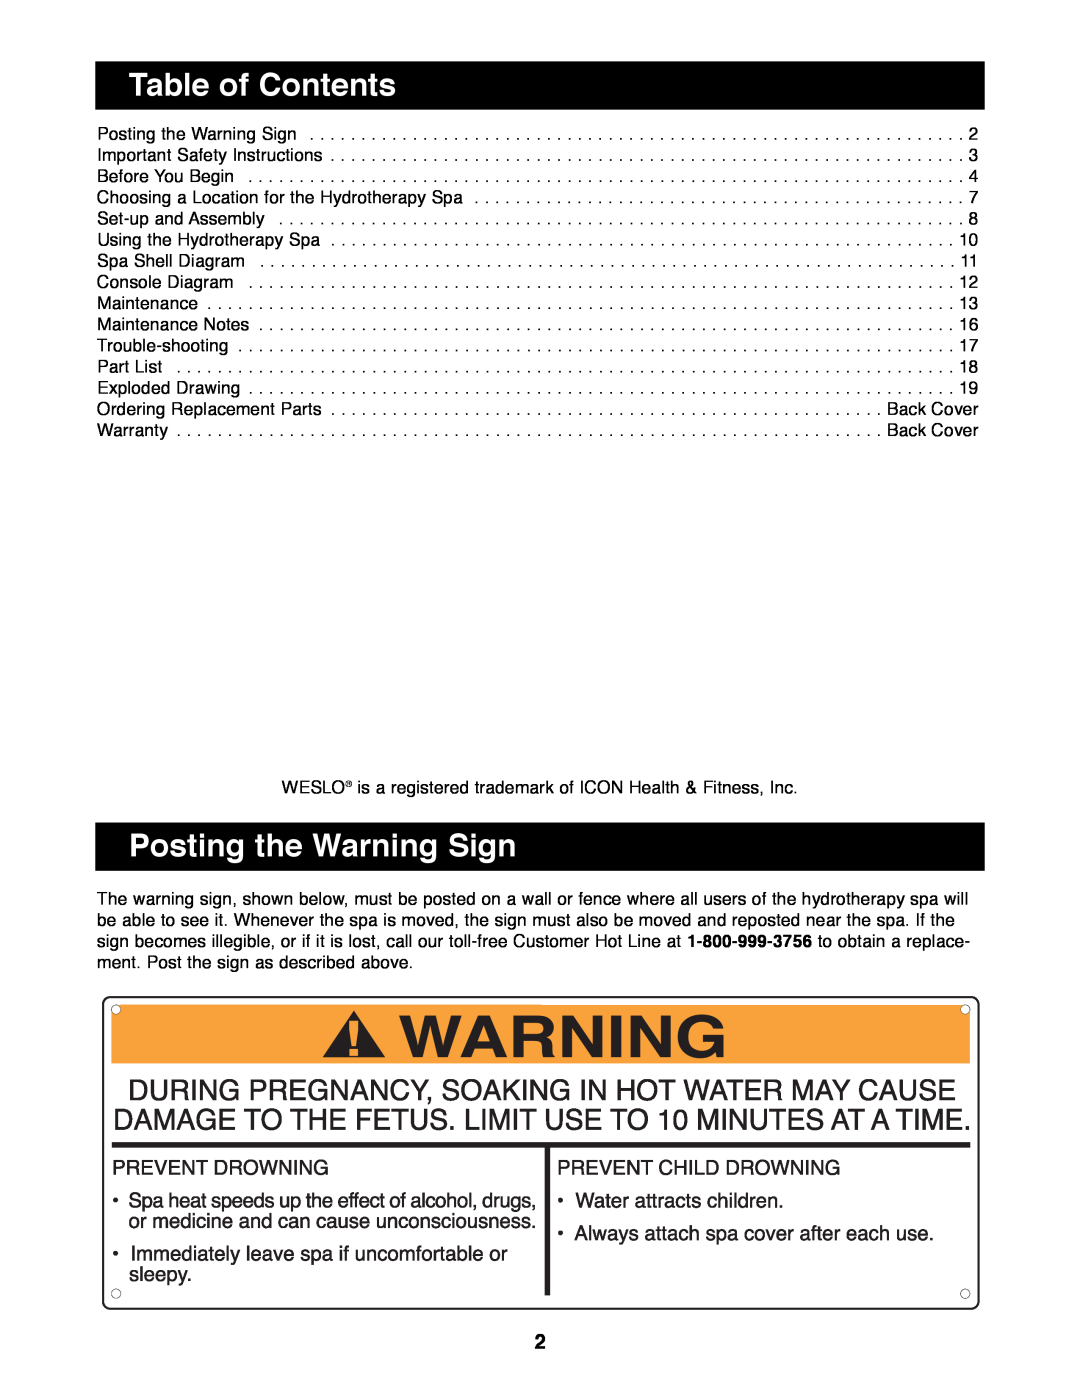 Weslo WLHS43081 Table of Contents, Posting the Warning Sign, Important Safety Instructions, Before You Begin, Maintenance 